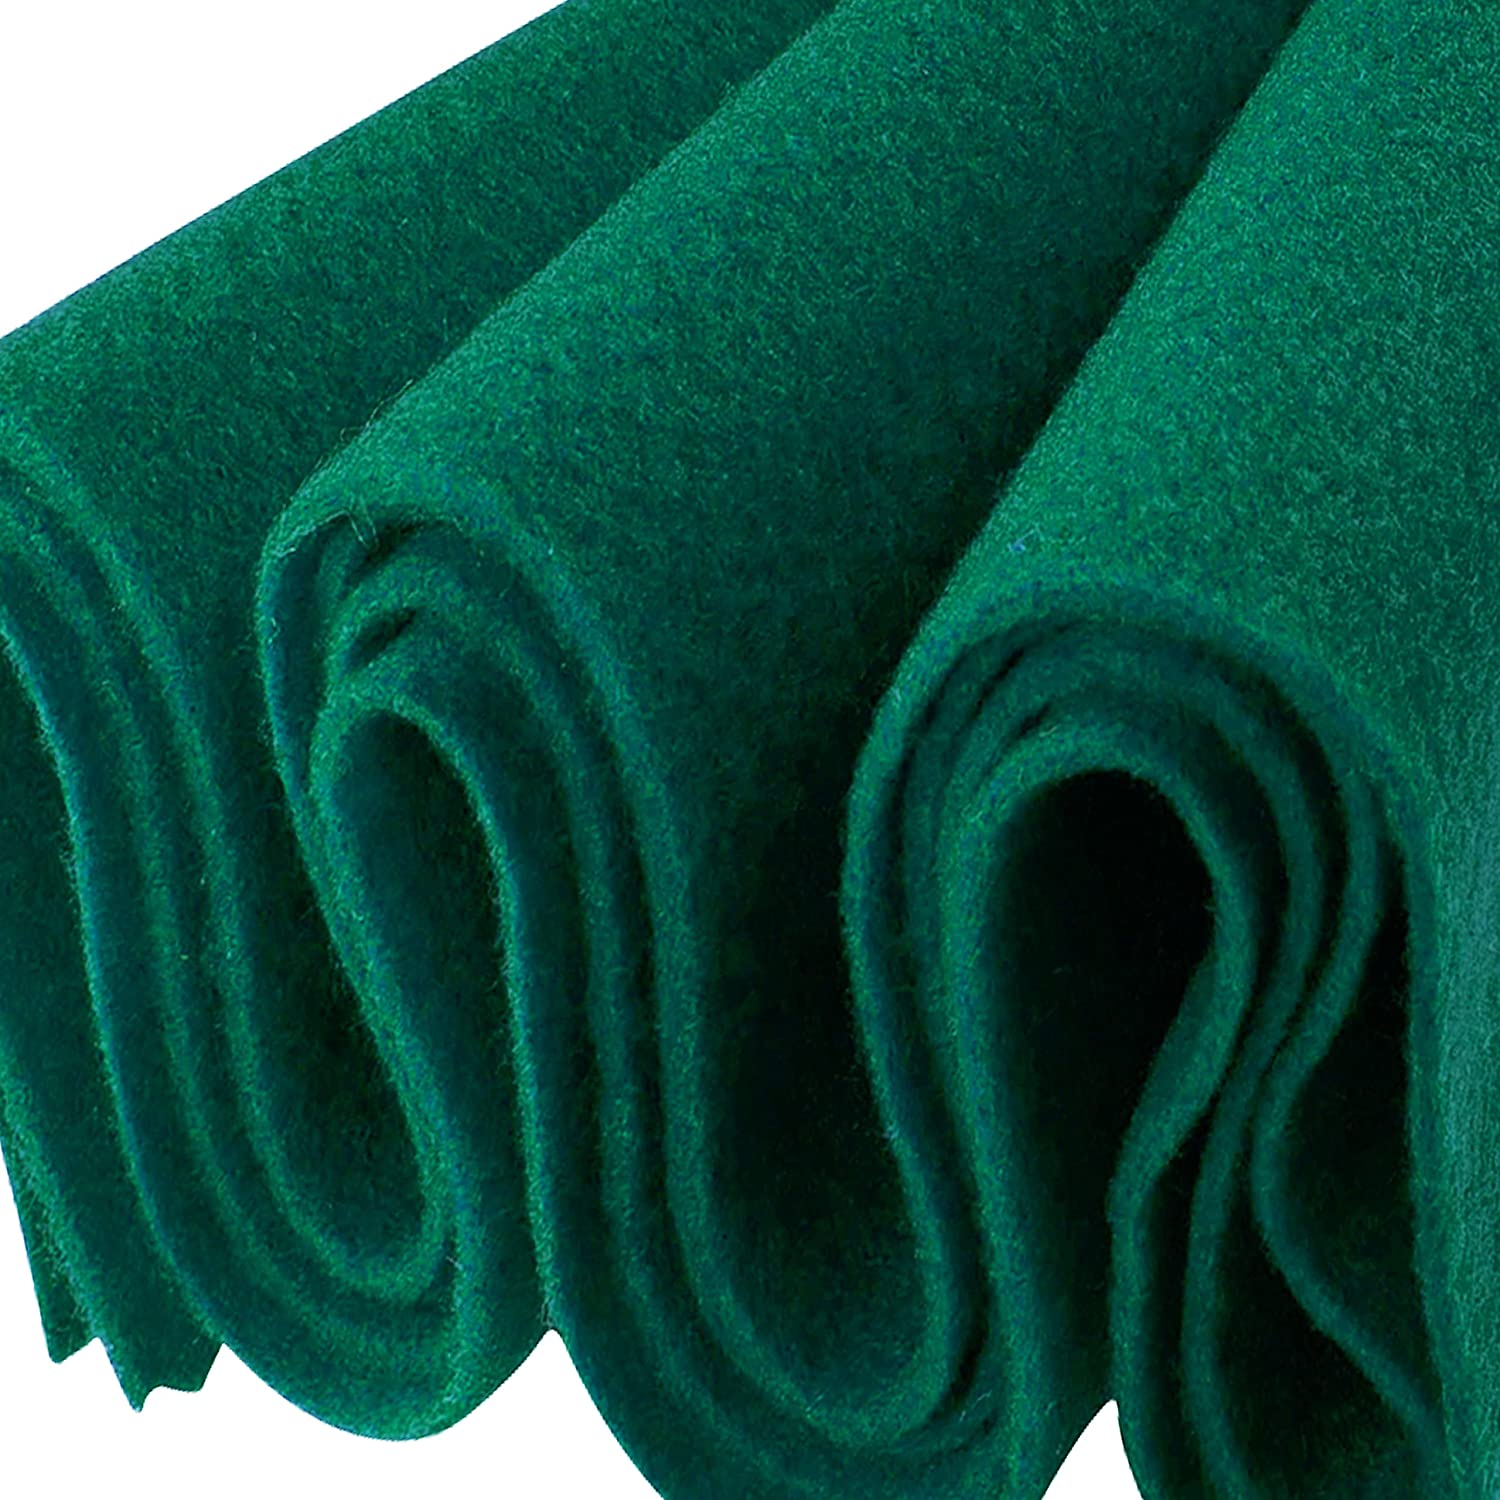 FabricLA Craft Felt Fabric - 18 X 18 Inch Wide & 1.6mm Thick Felt Fabric  by The Yard - Kelly Green - Use This Soft Felt Roll for Crafts - Felt  Material Pack 